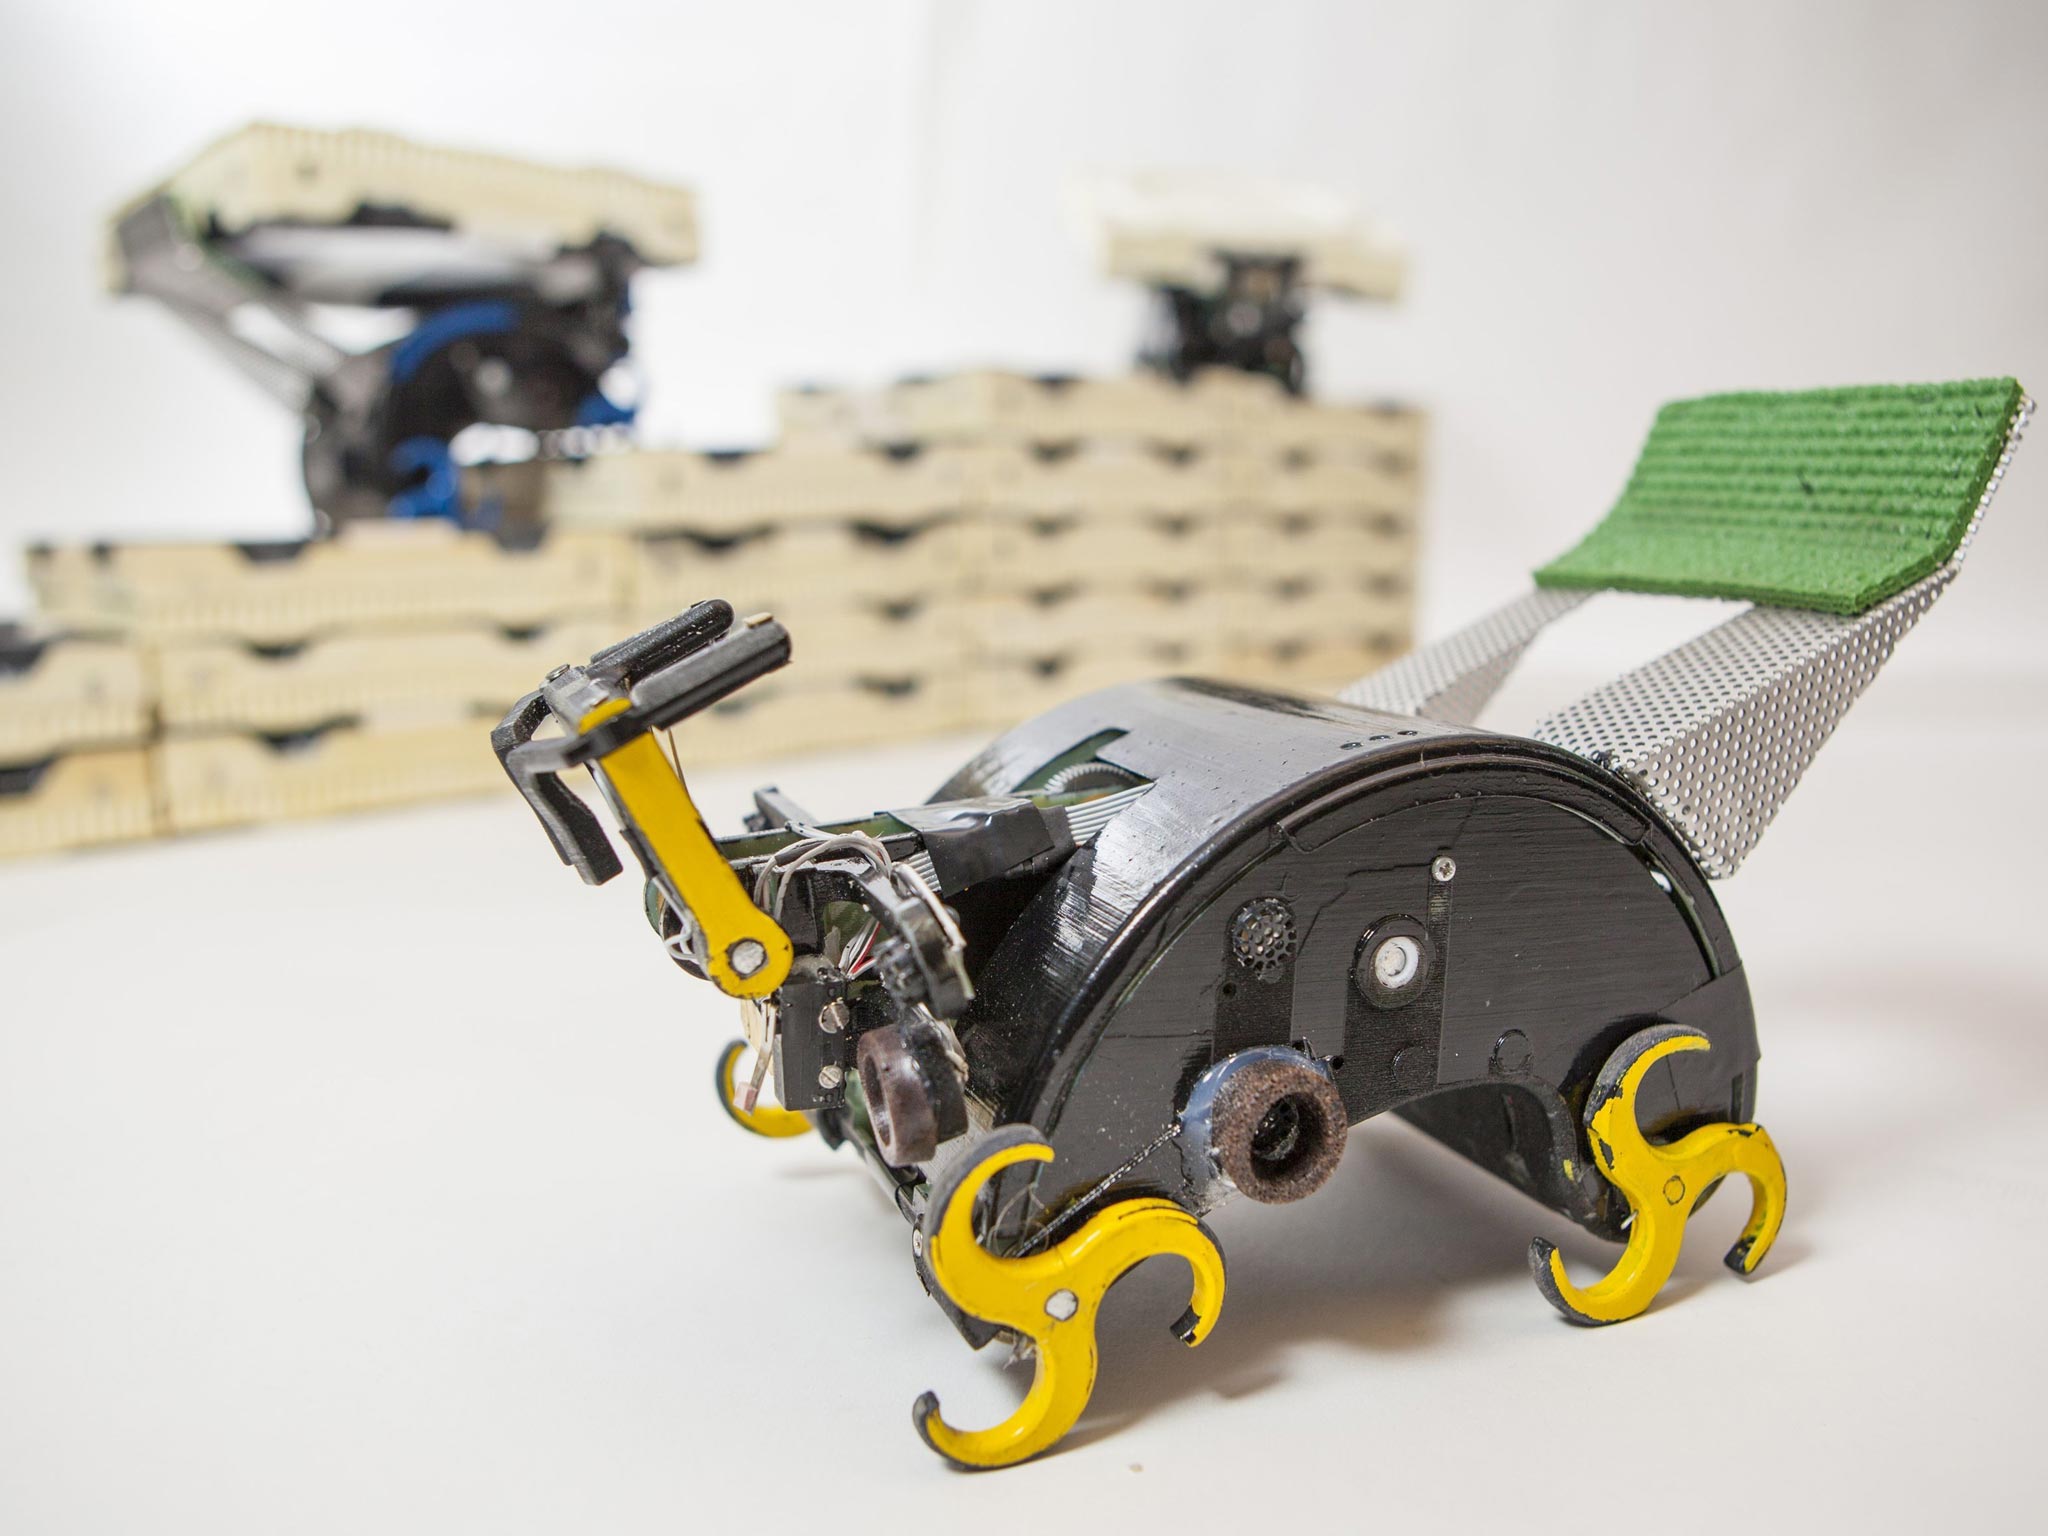 An autonomous construction crew of builder robots that behave like termites, which scientists have created